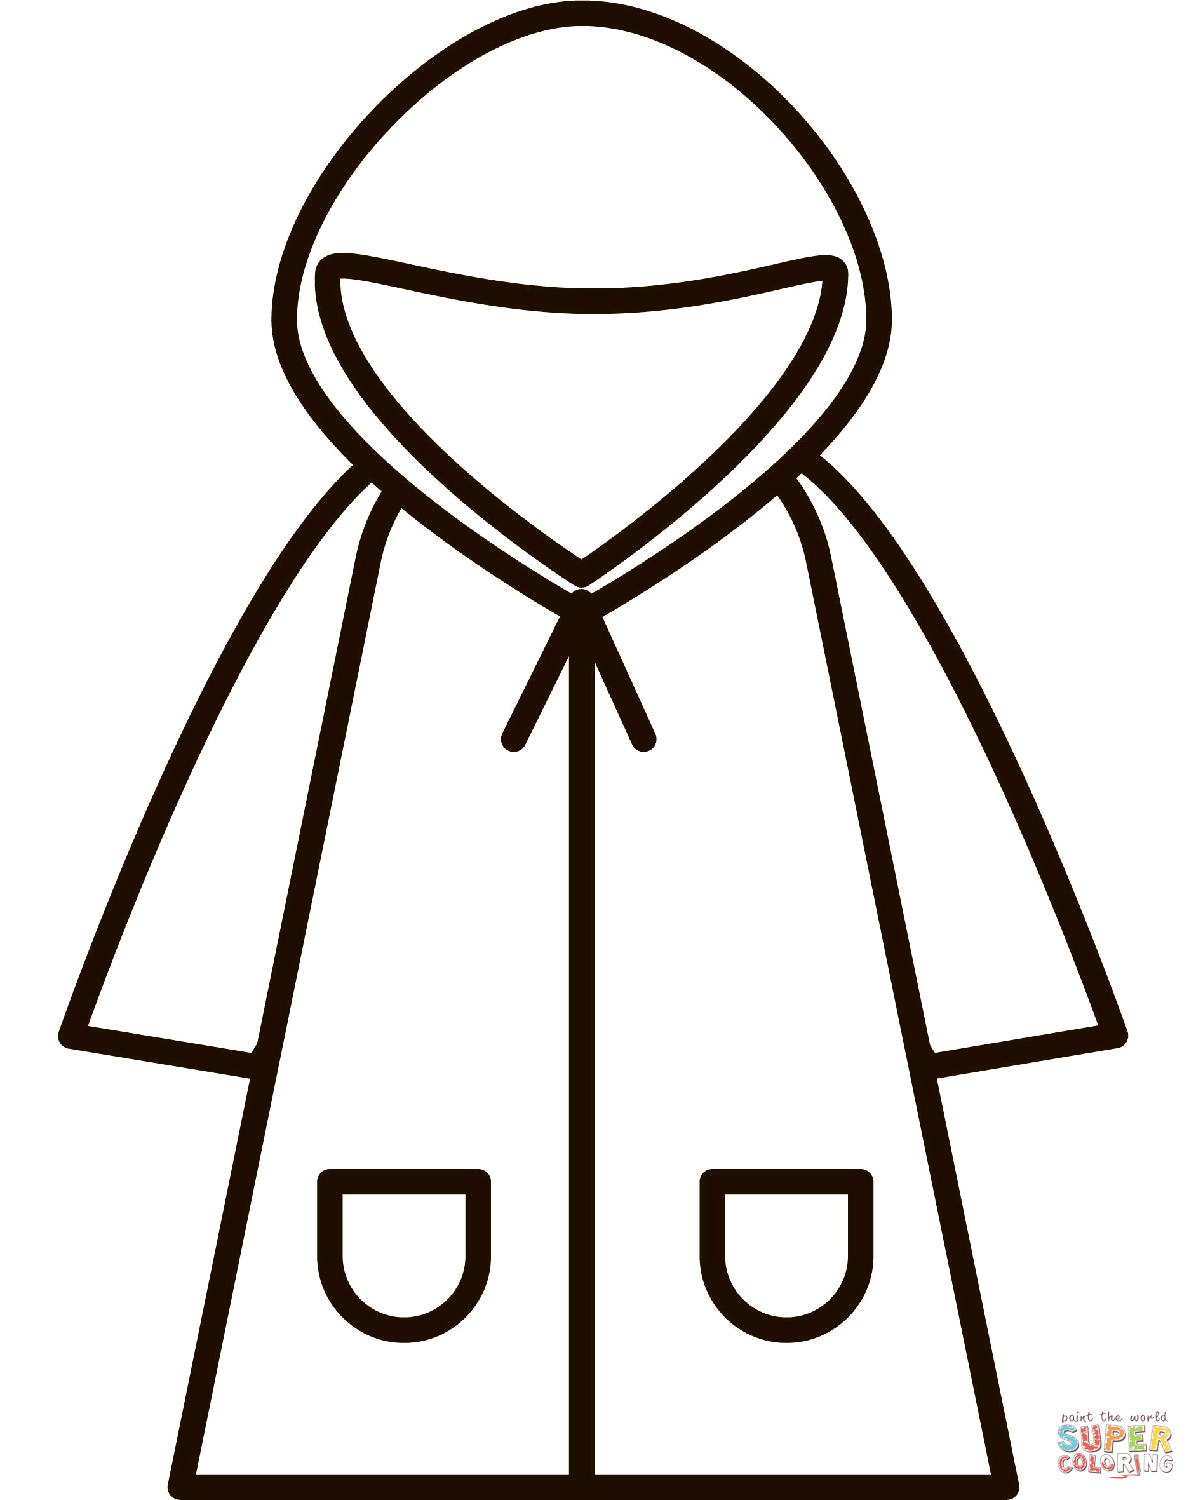 Raincoat Coloring Pages - Coloring Home